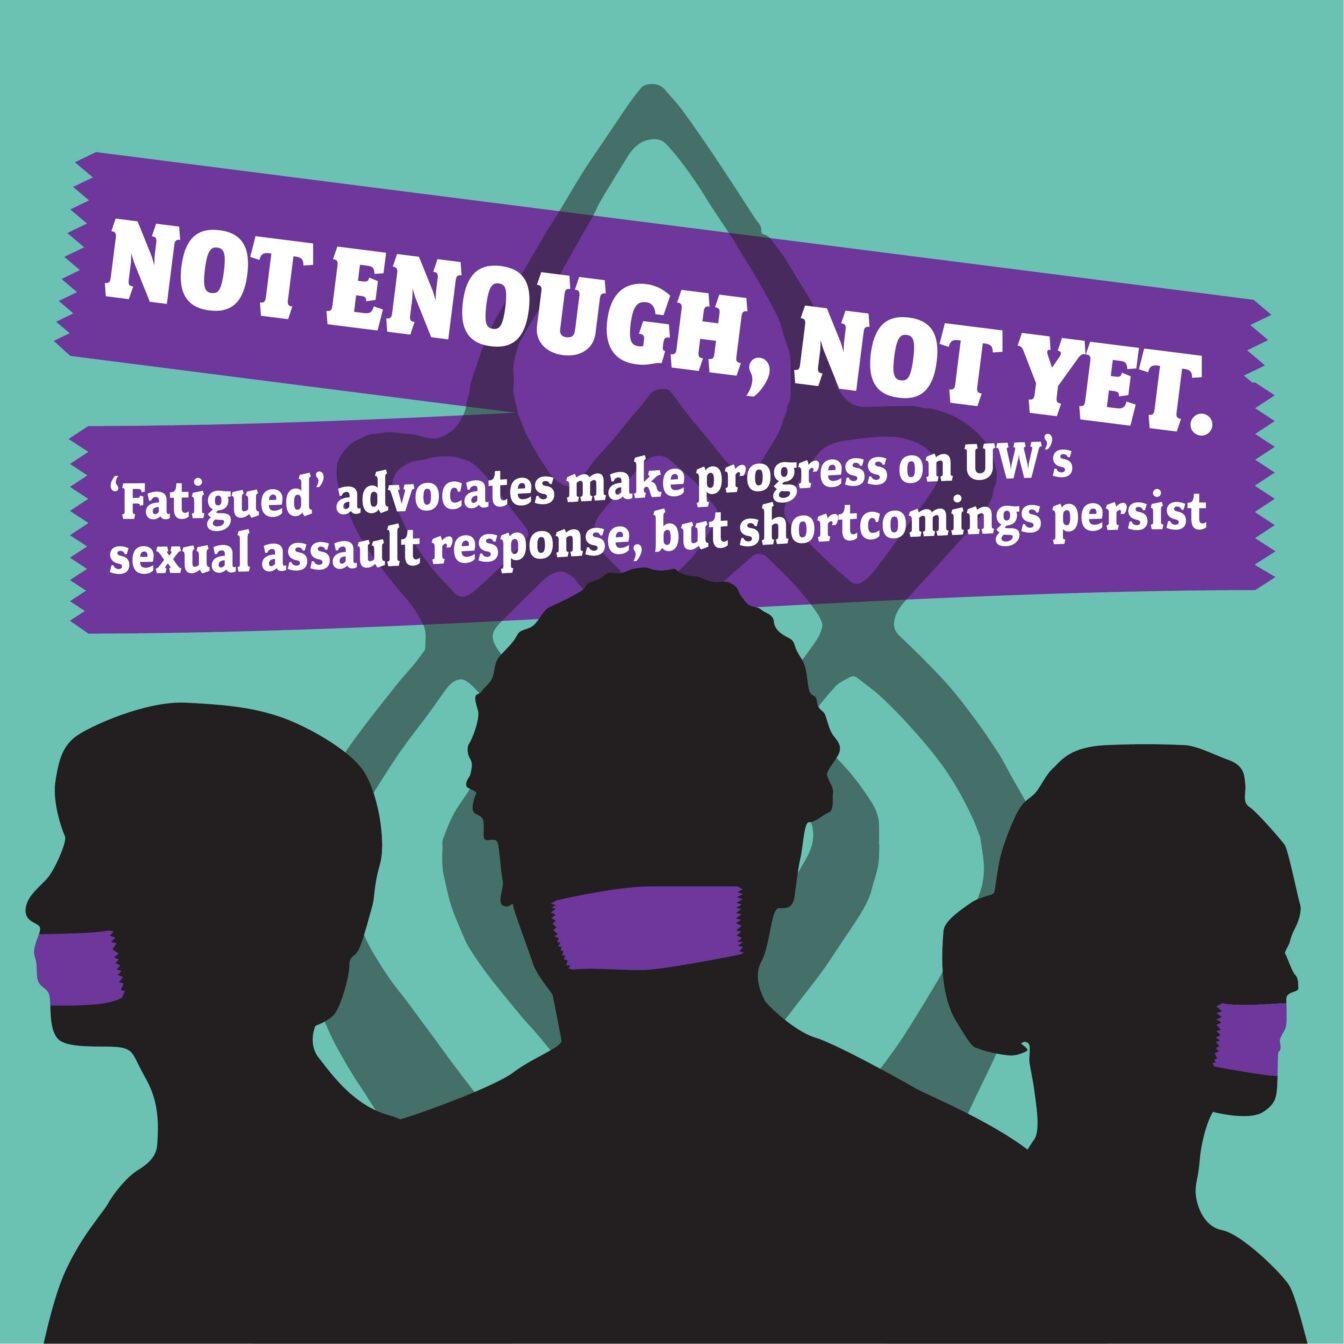 Not enough, not yet: UW makes progress on sexual assault response, but shortcomings persist